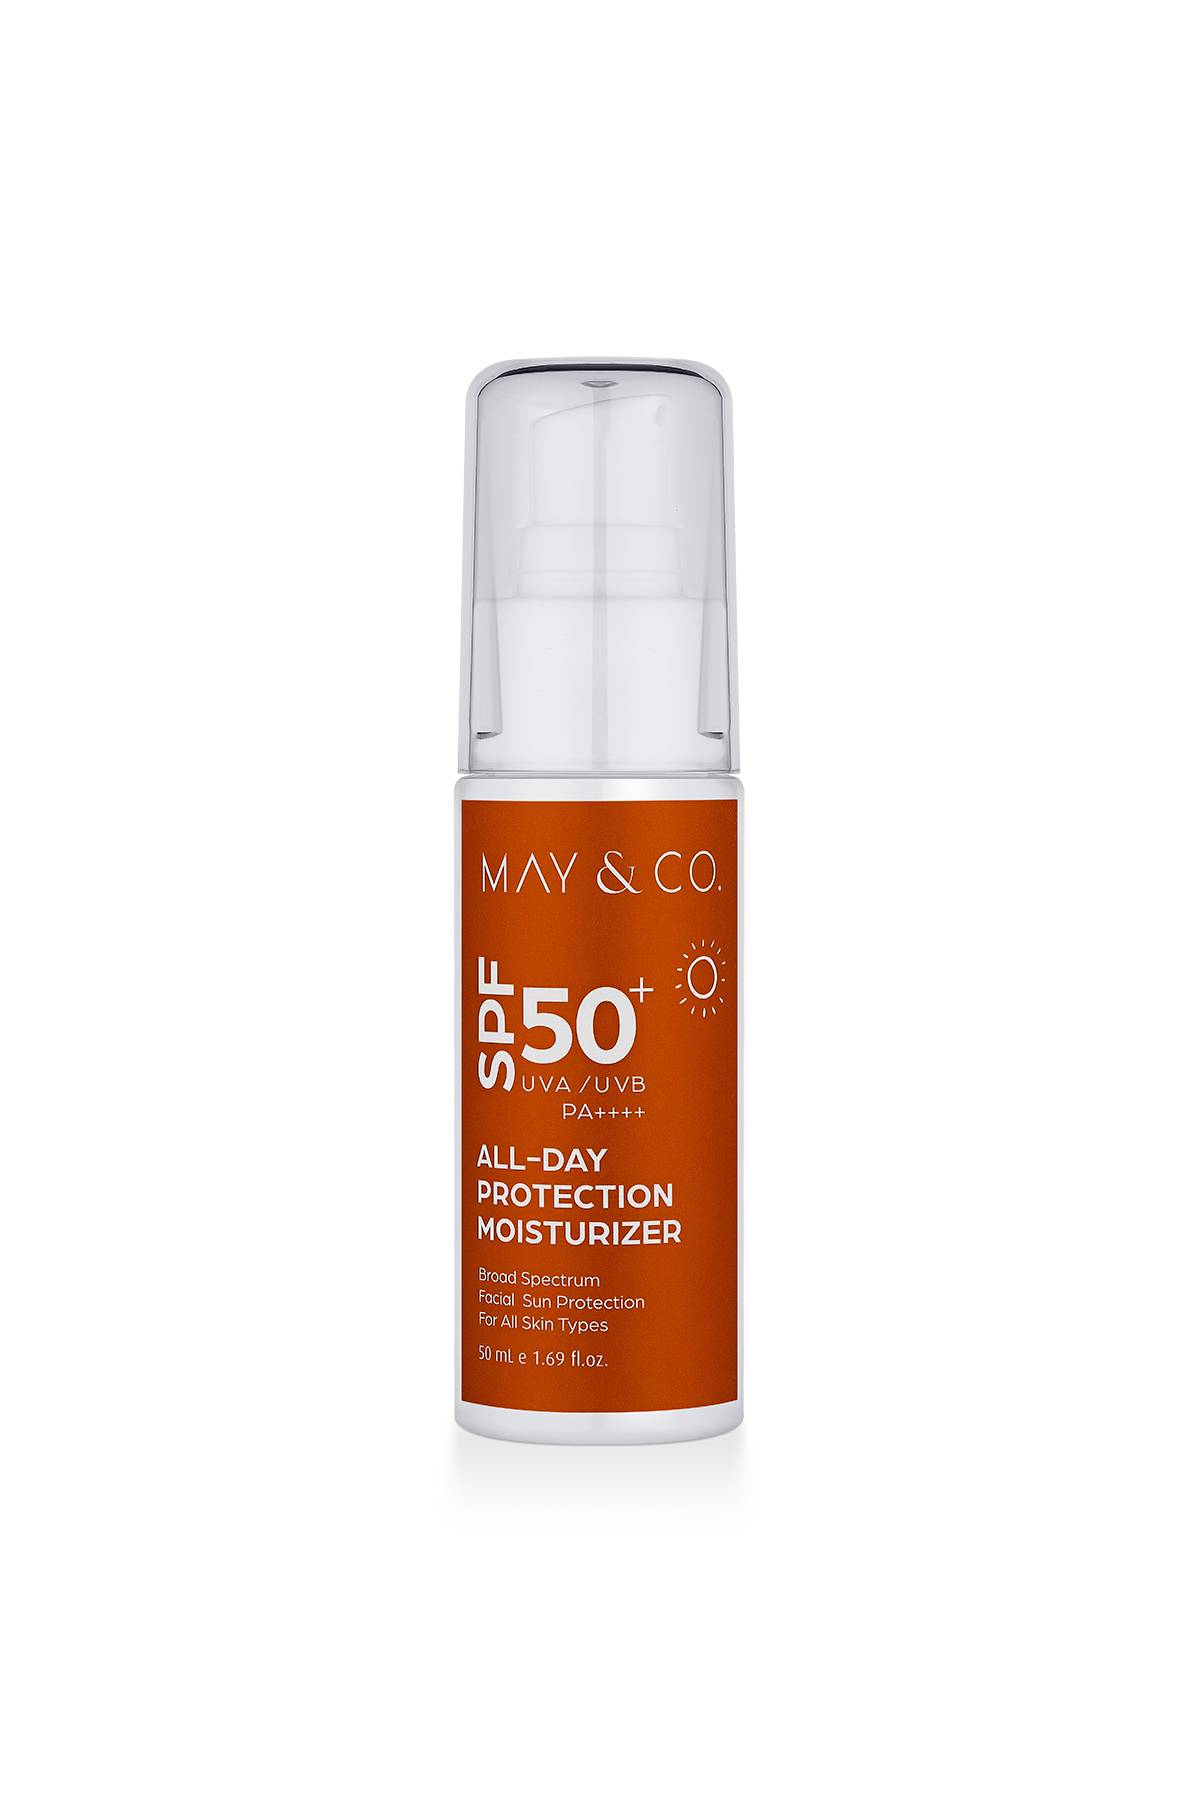 All-Day Protection Moisturizer SPF50+ PA++++